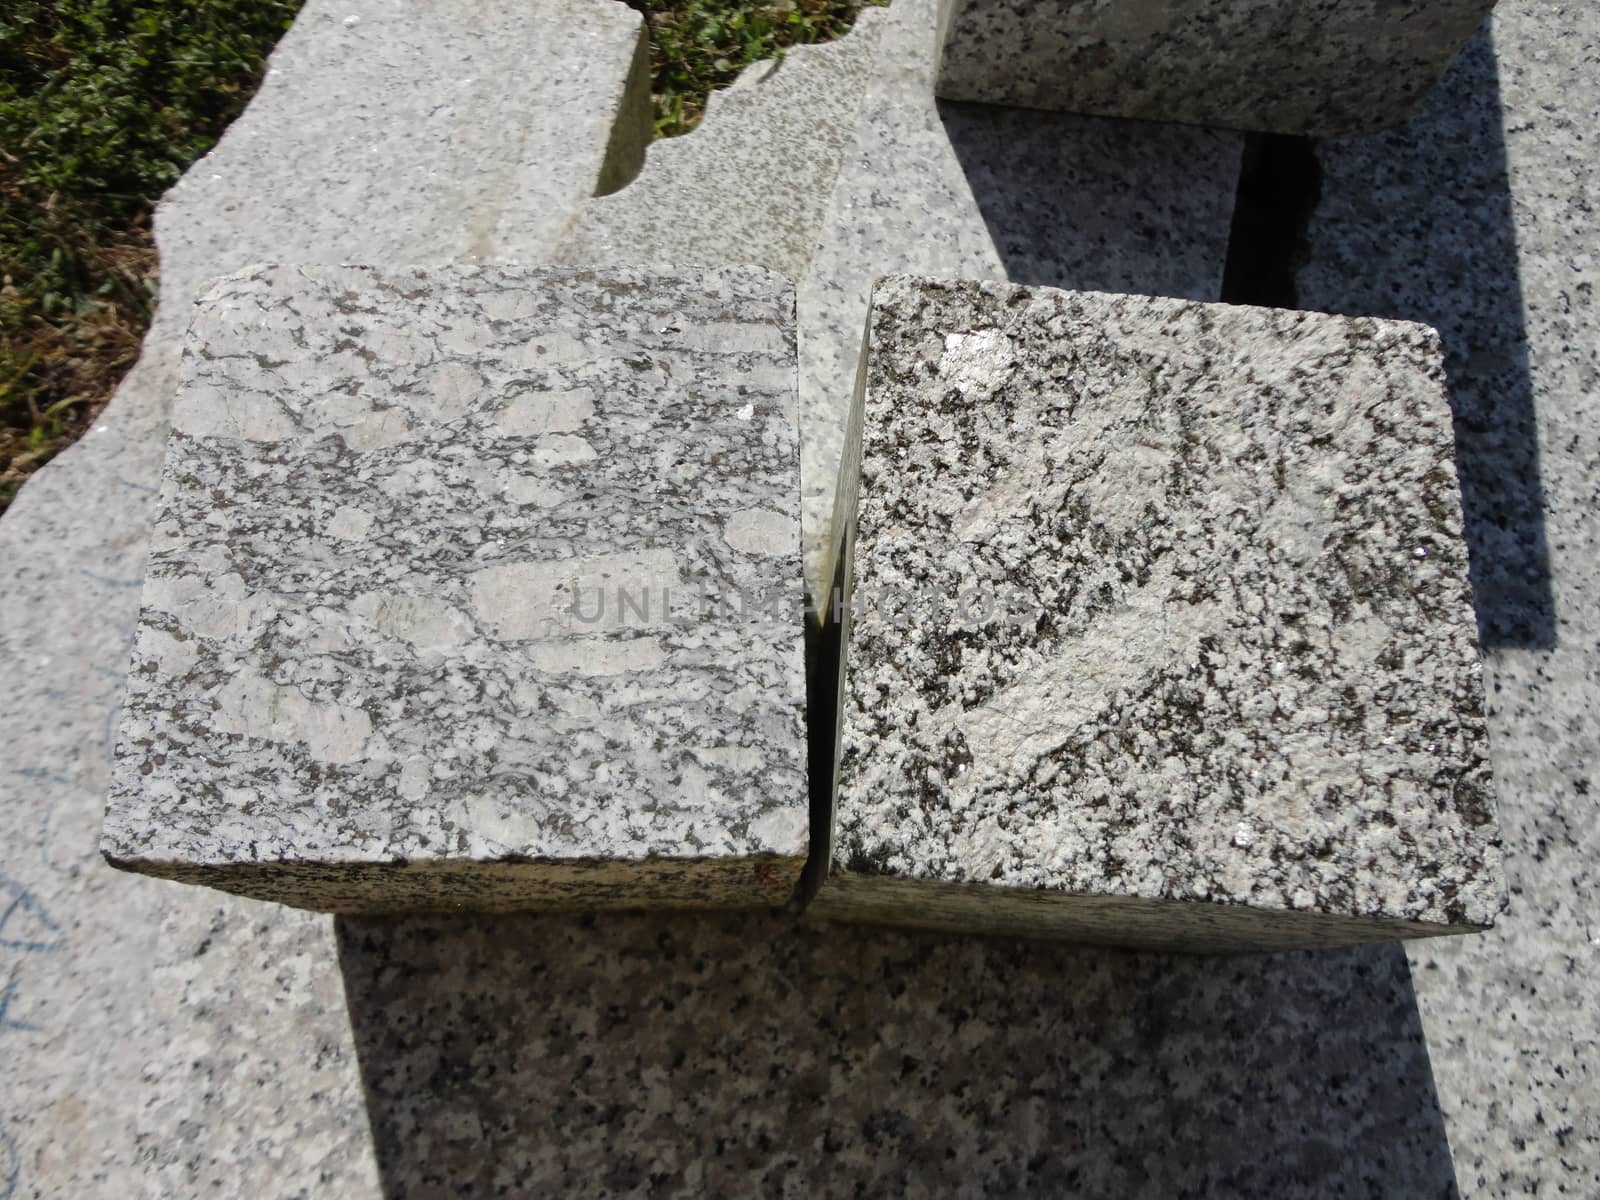 A manufactured industrial cutting of granite rock. Section View.